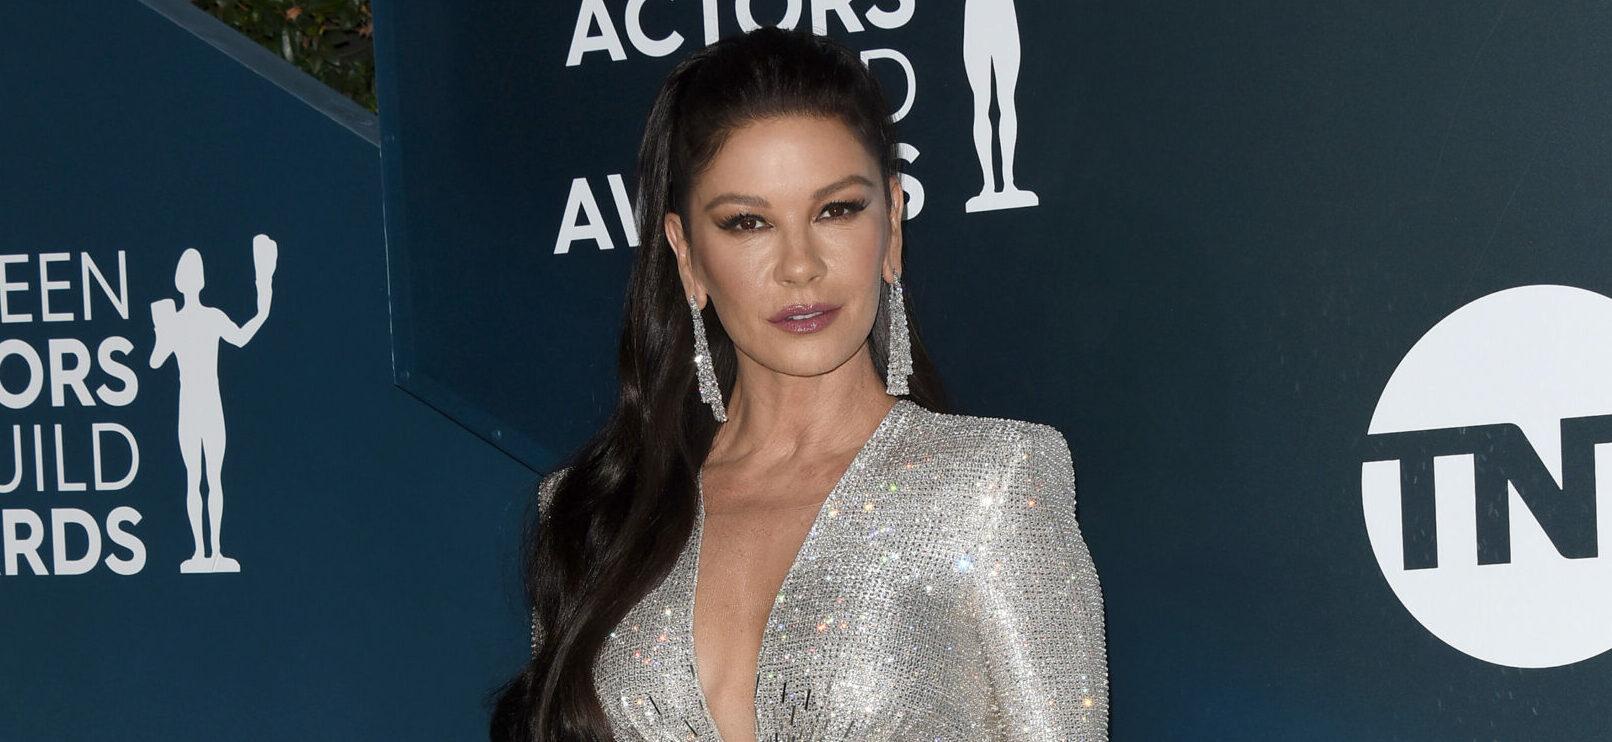 Catherine Zeta-Jones Reminds Fans Of Youthful Beauty As She Celebrates Son’s Birthday With Throwback Pic